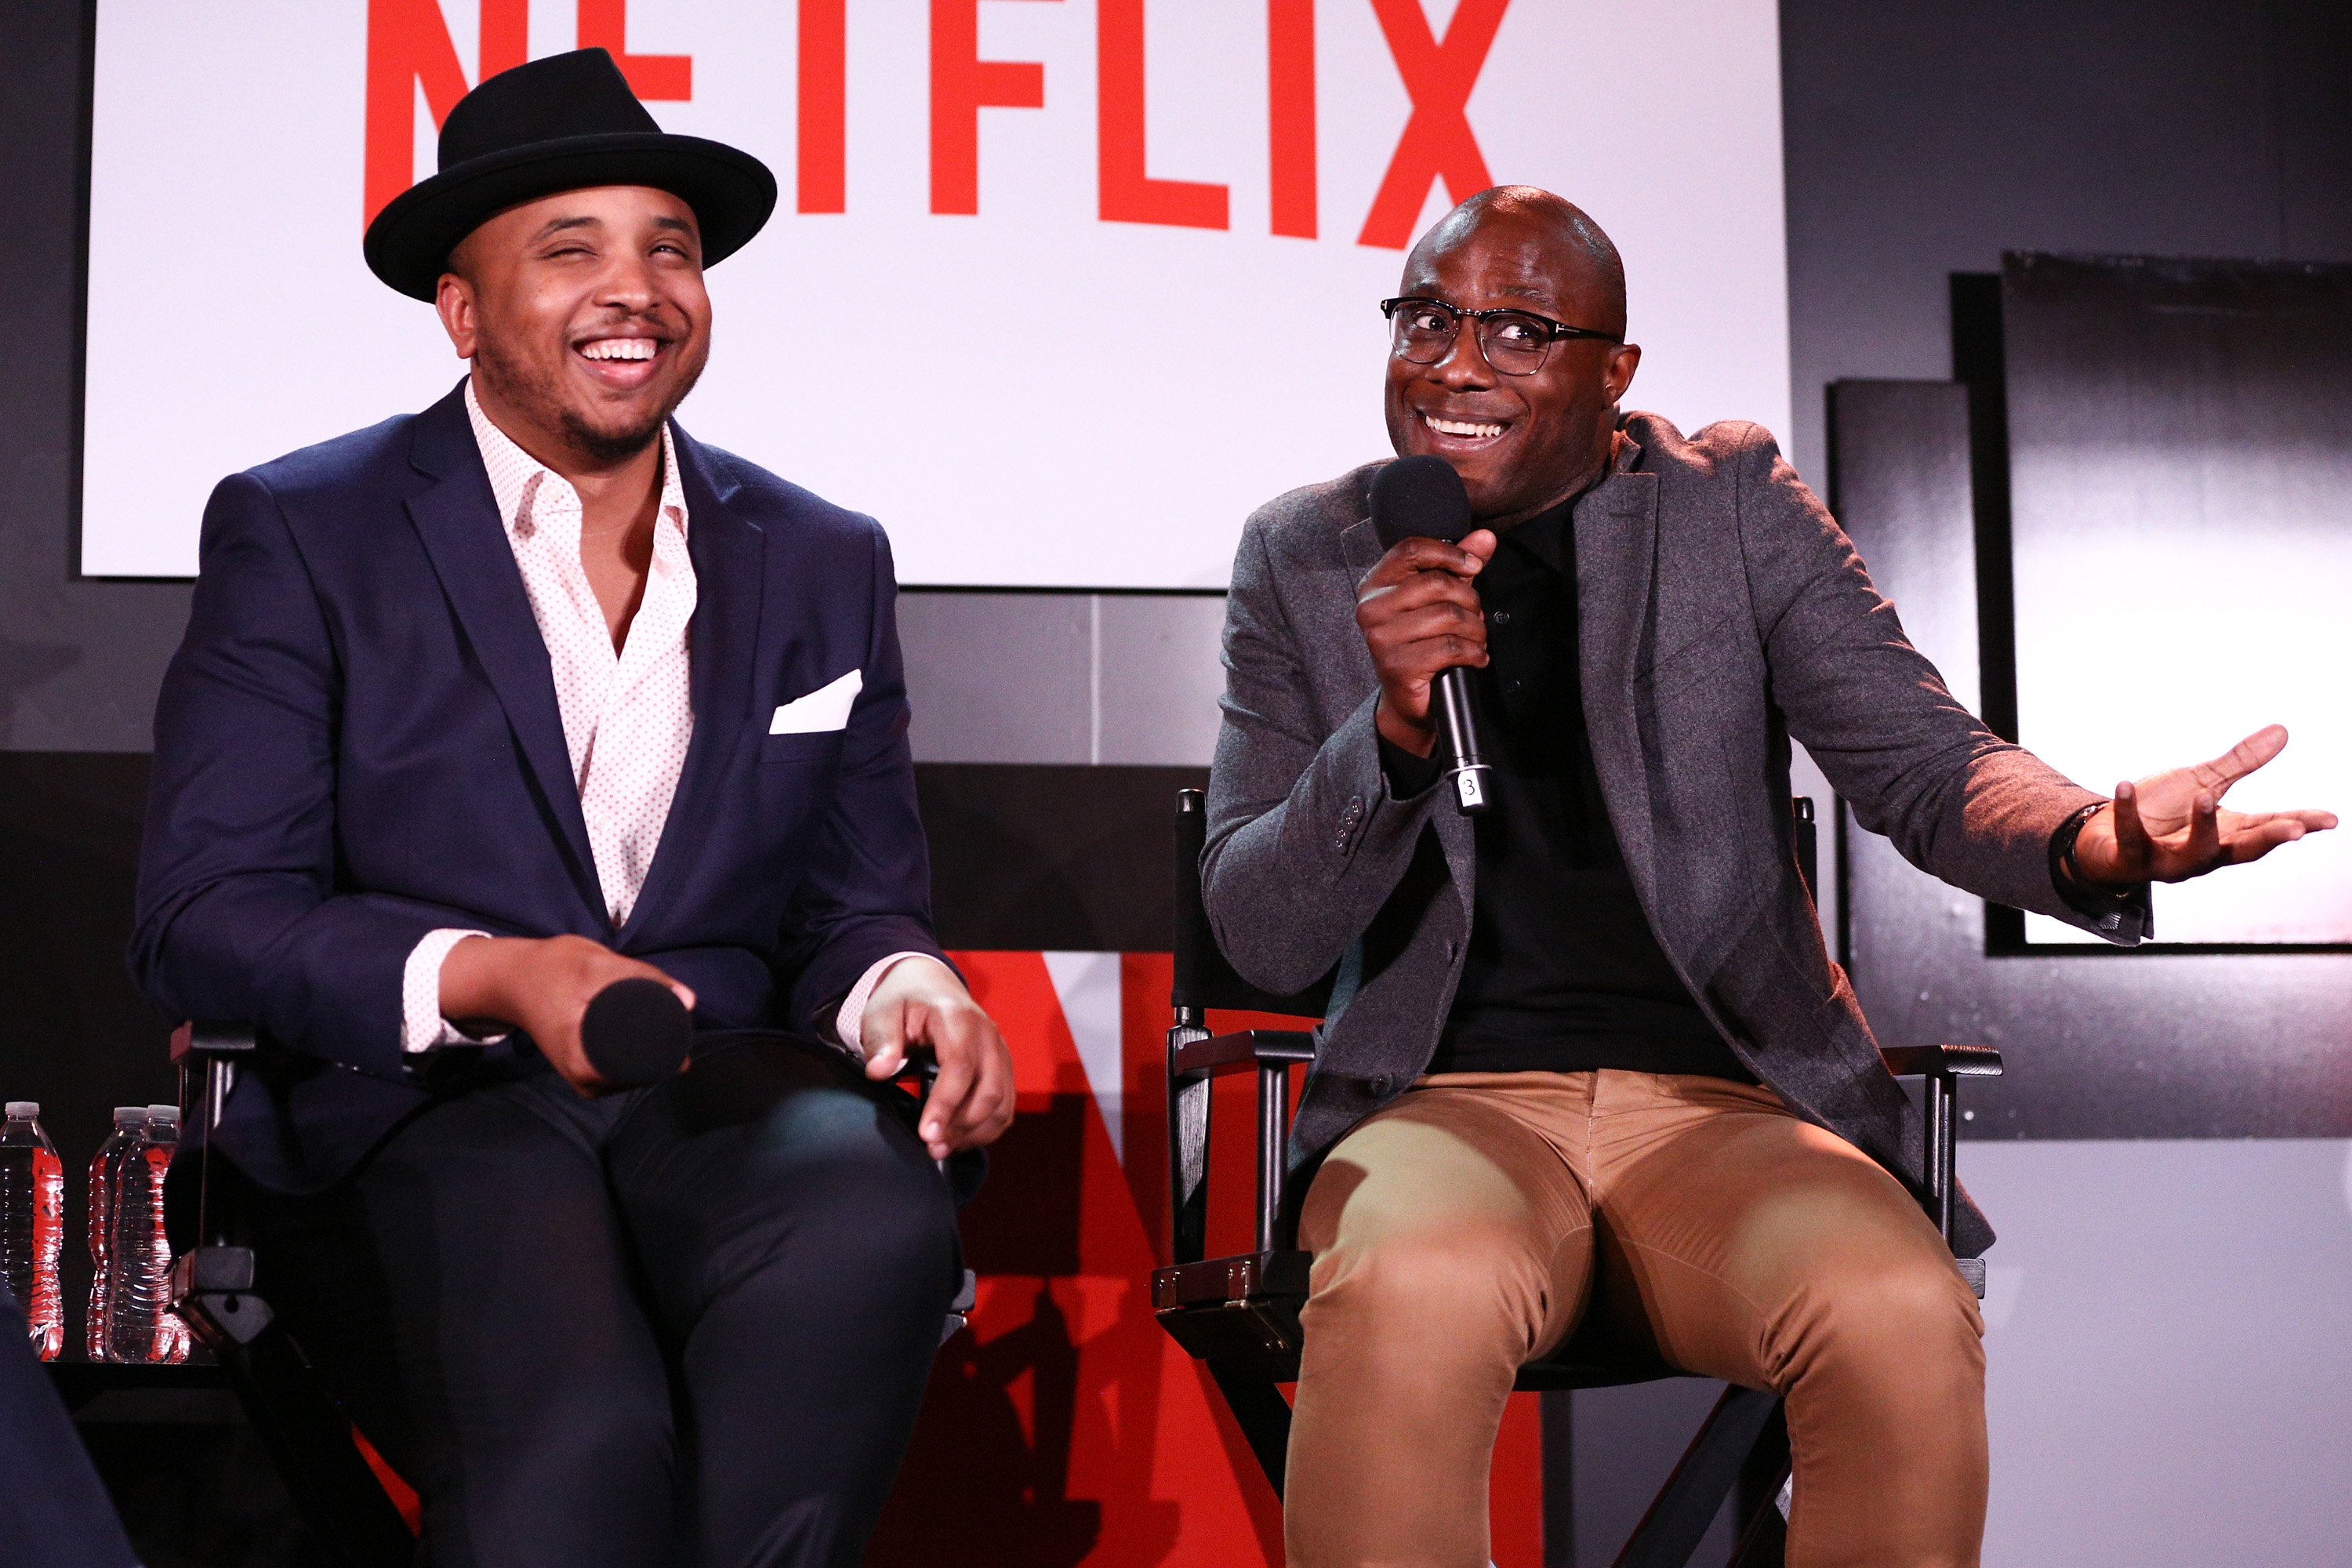 Netflix's 'Dear White People' For Your Consideration Event - Panel